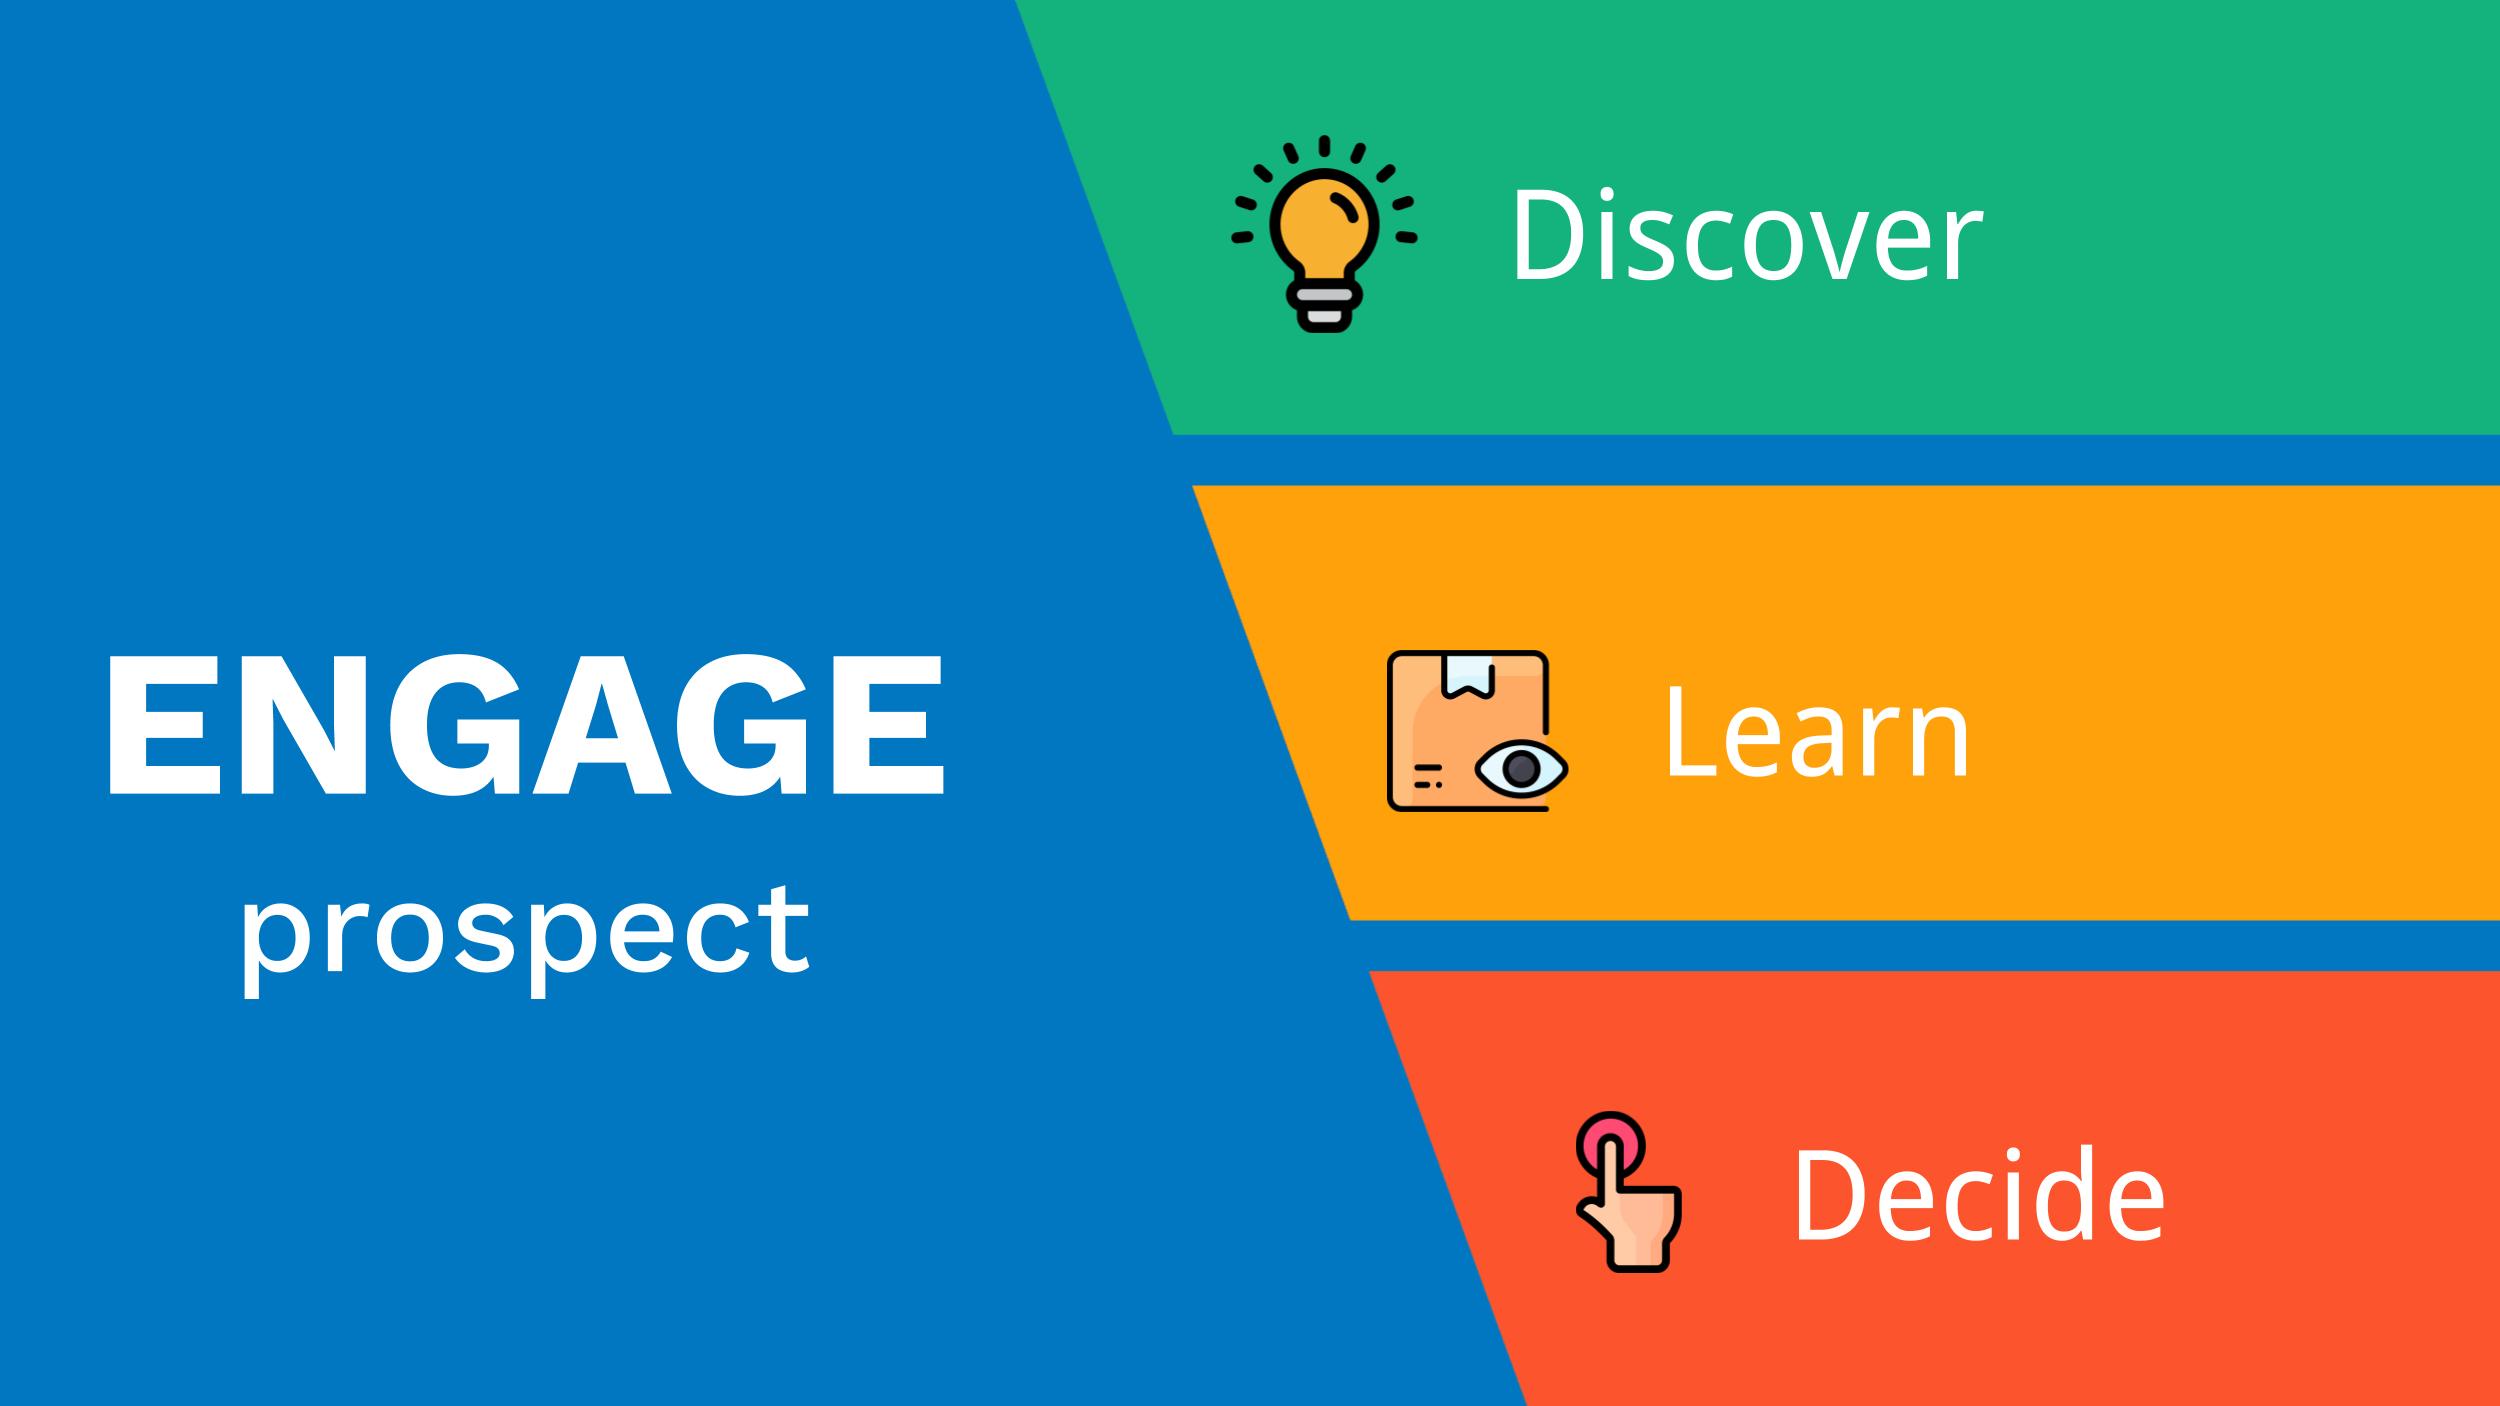 Engage Prospect - Discover, Learn & Decide